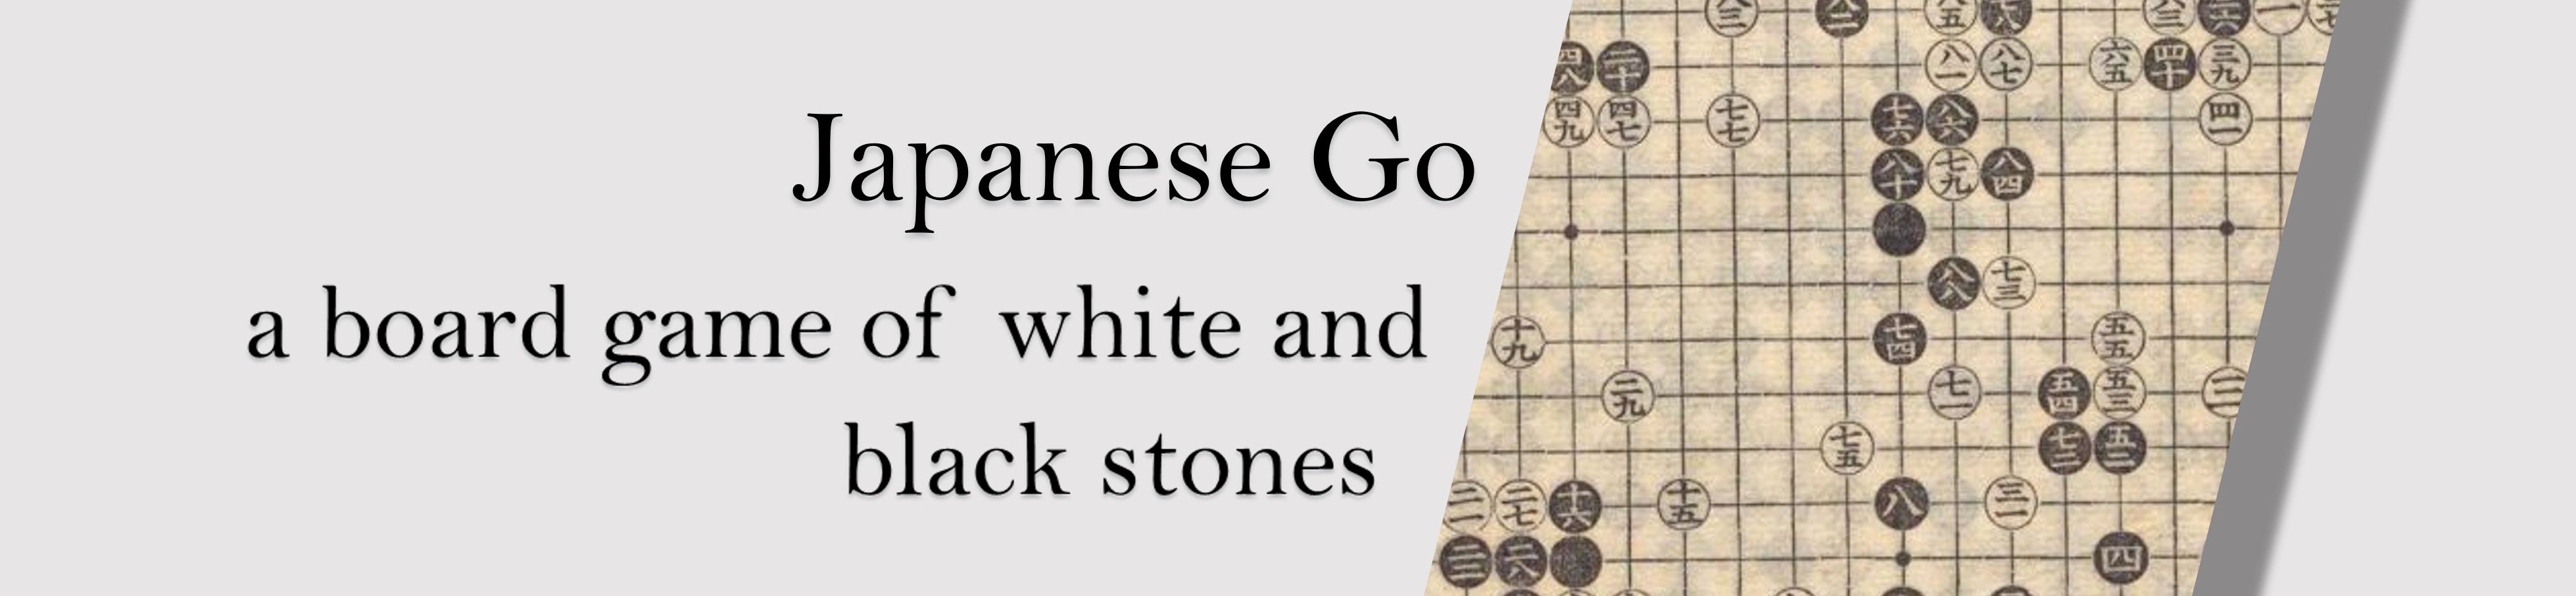 Japanese Go—a board game of white and black stones